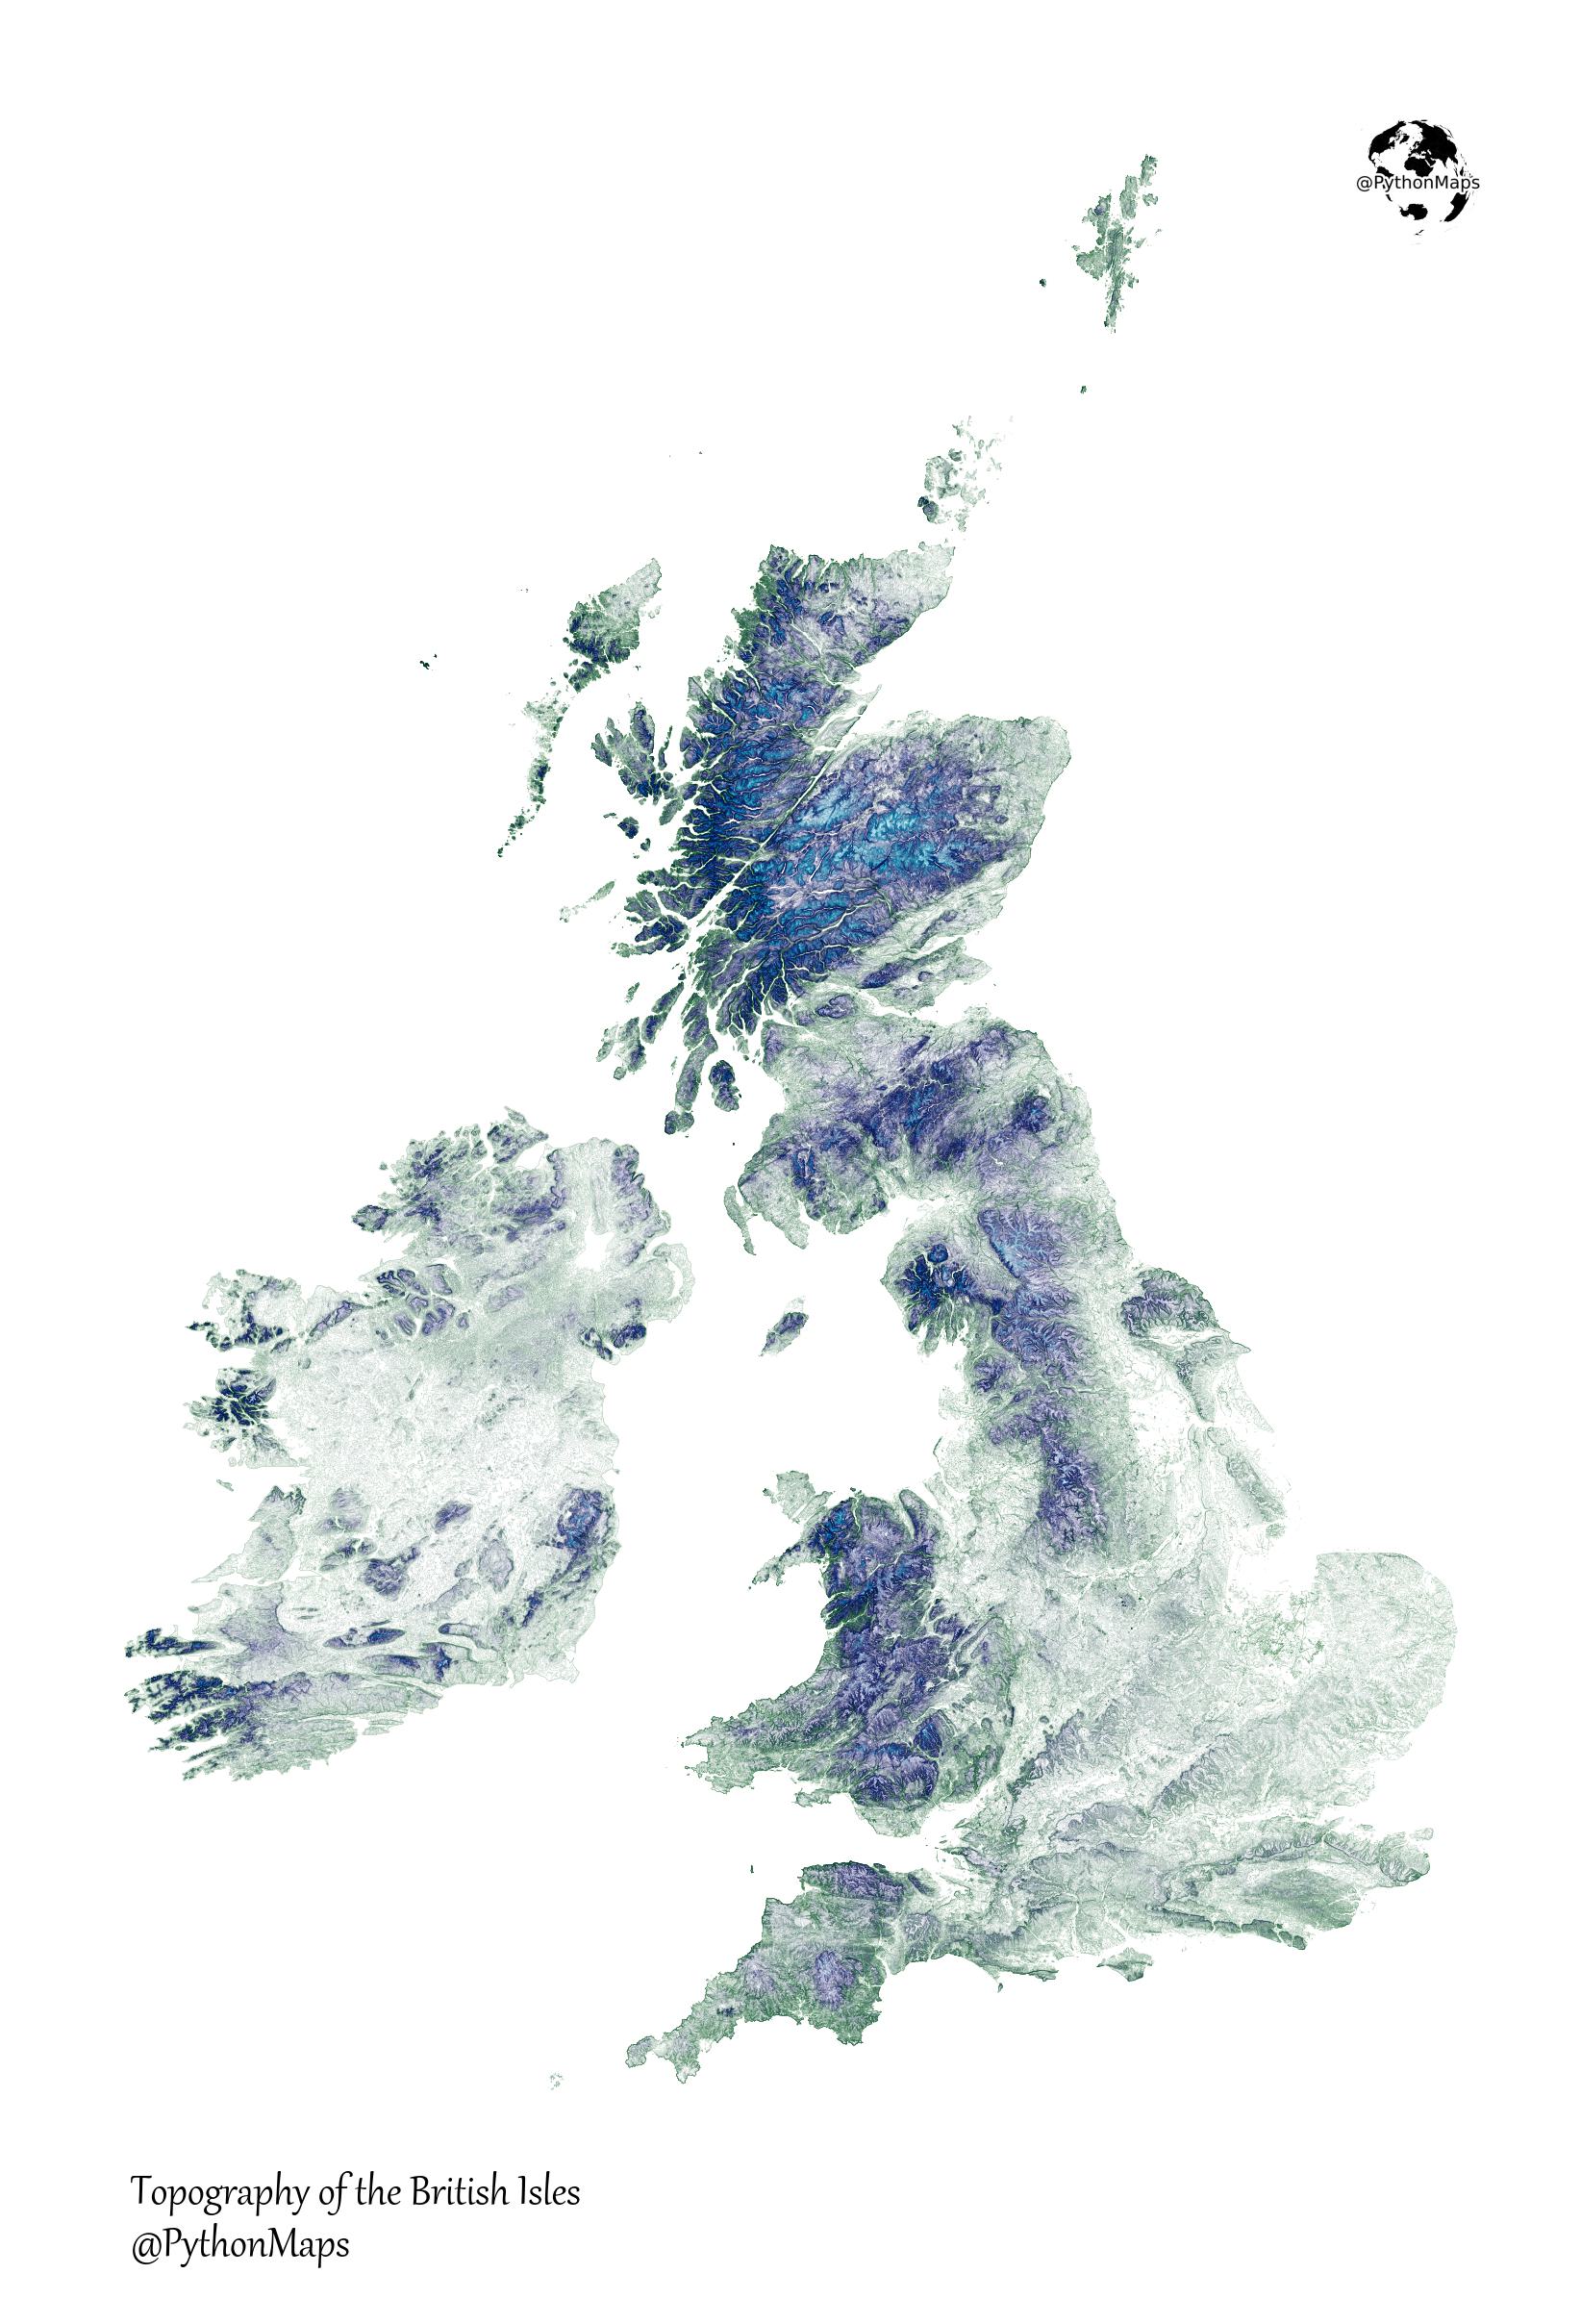 Topography of the British Isles